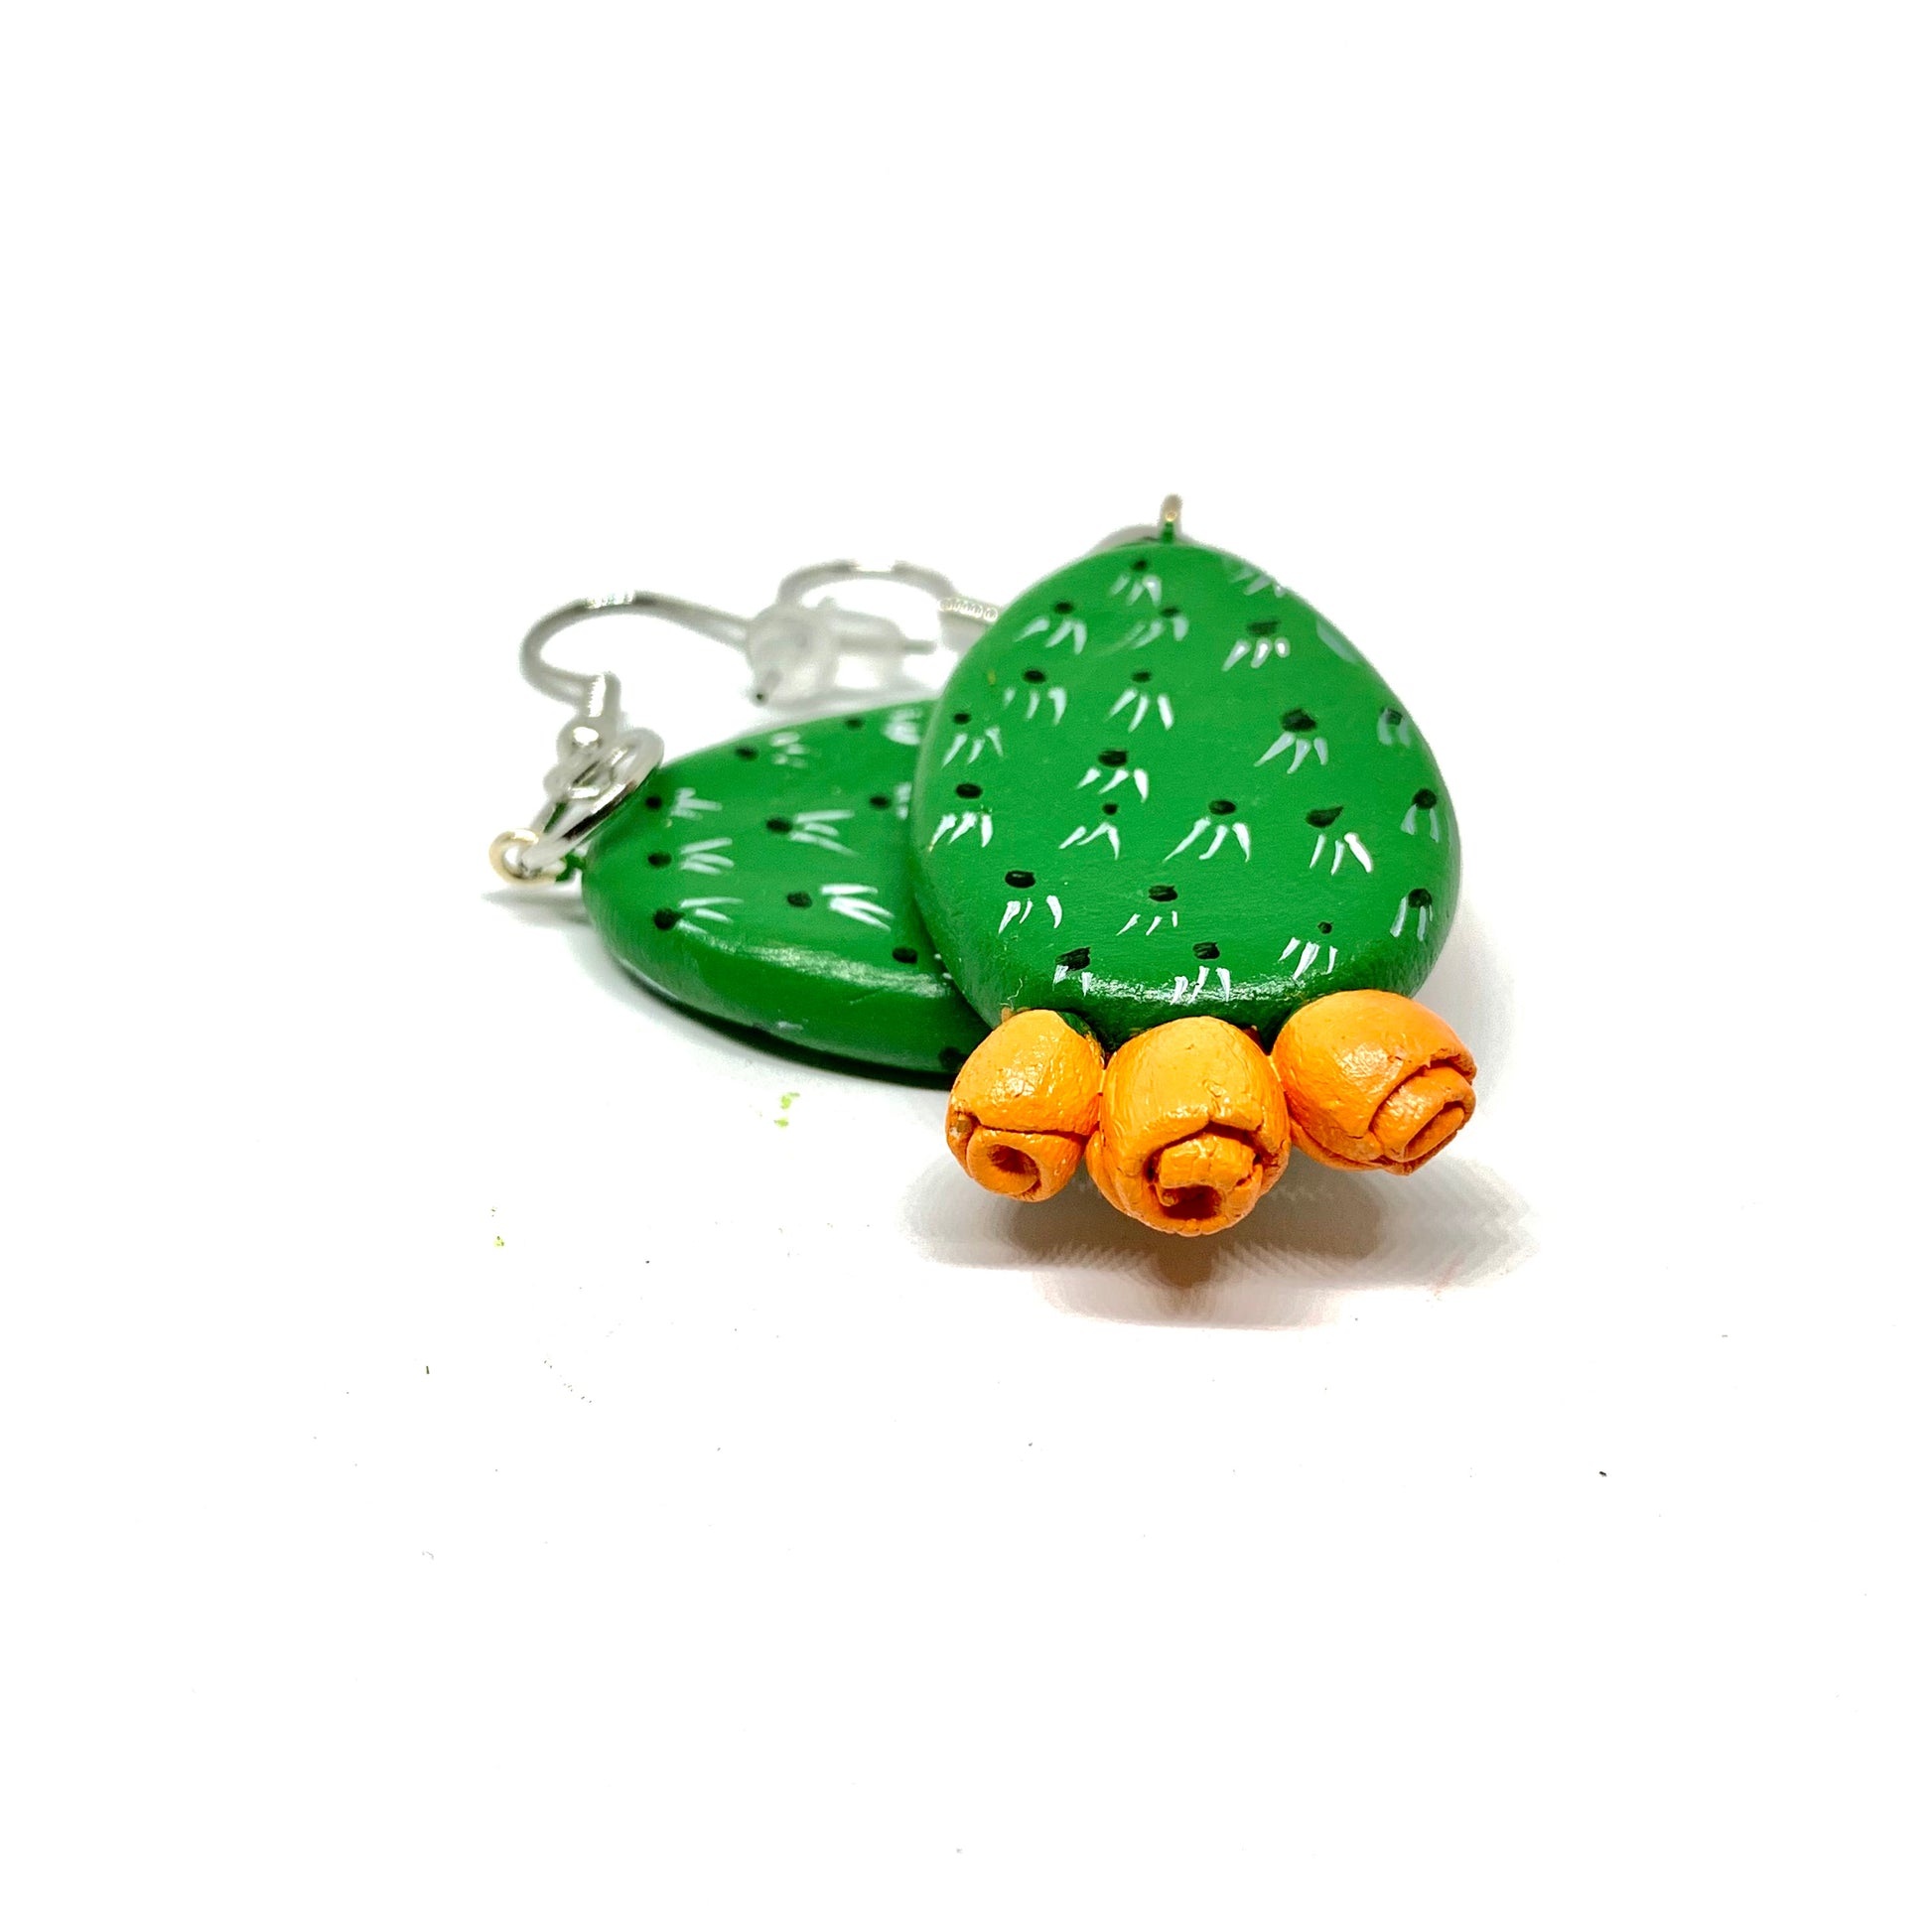 Cactus earrings. Handmade hand painted clay cactus earrings. Mexican jewelry by Fridamaniacs Frida Kahlo inspired Mexico Folk art. Wearable art accessories from Claywelry™